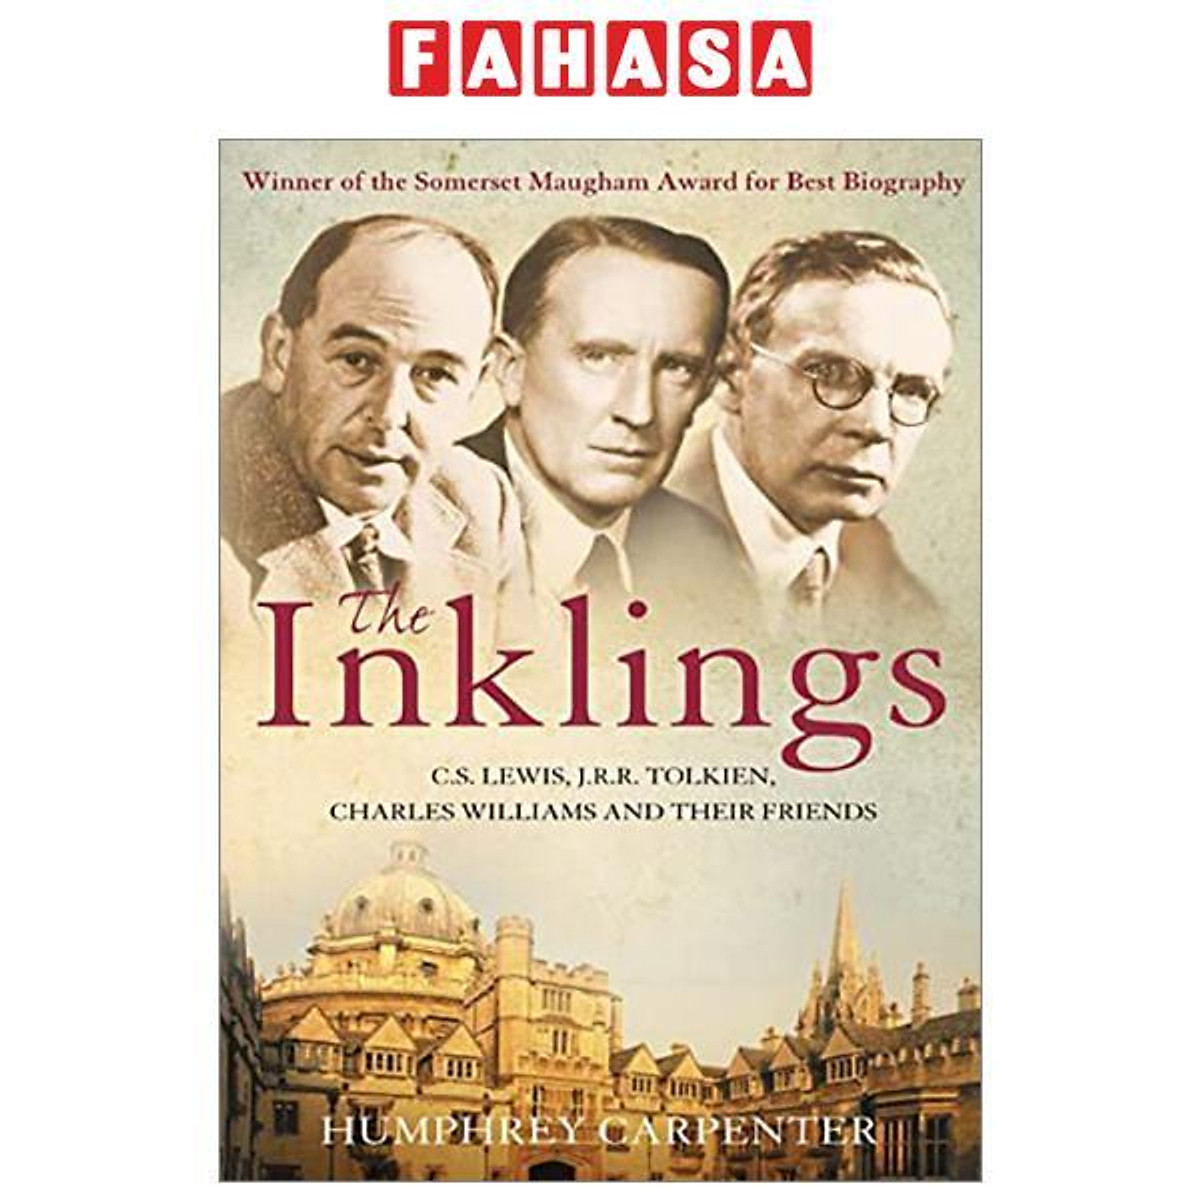 The Inklings: C. S. Lewis, J. R. R. Tolkien And Their Friends